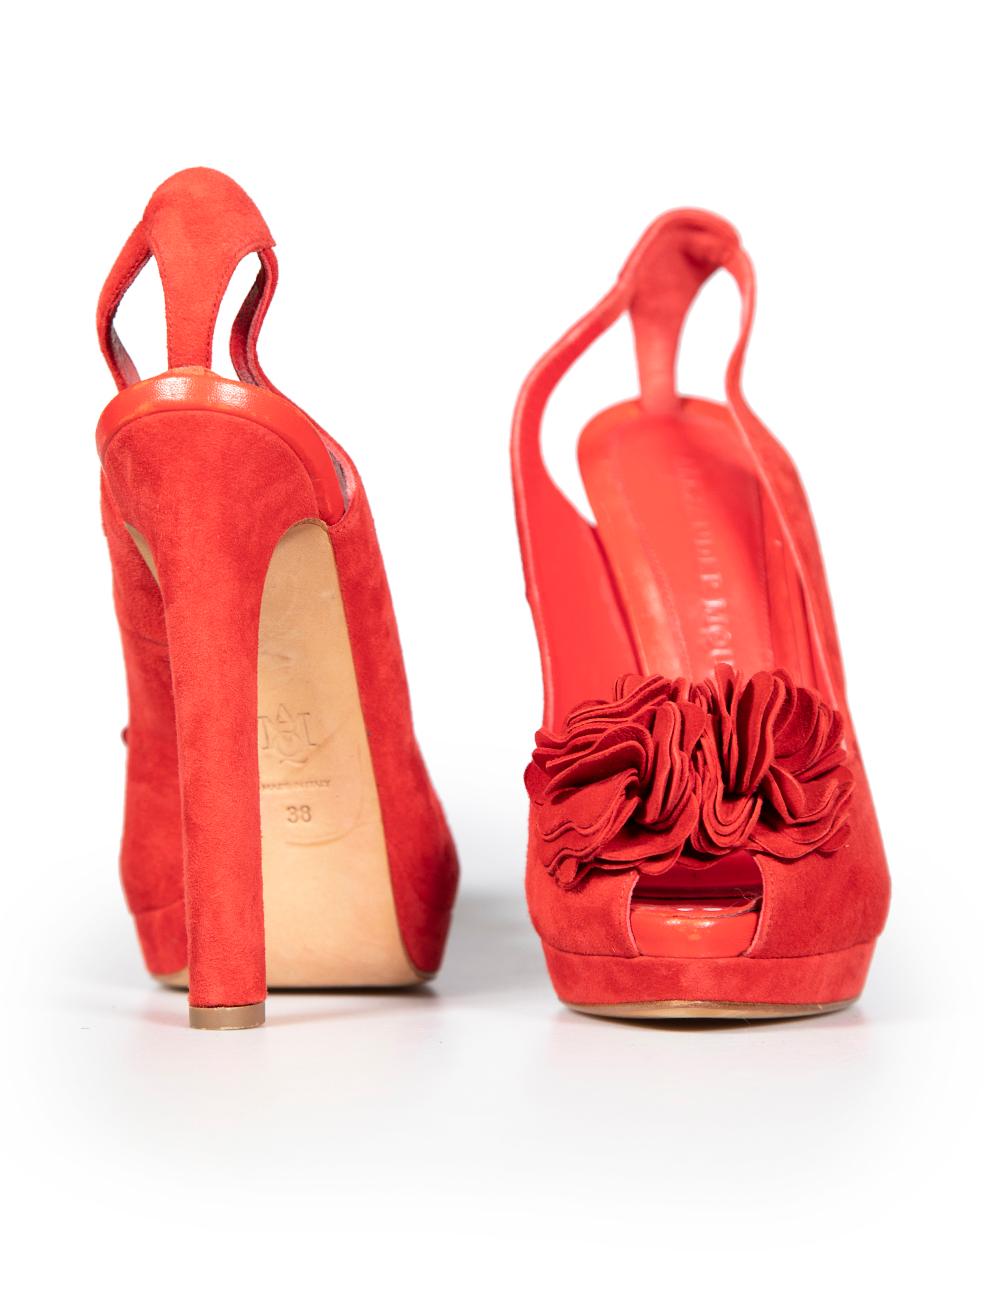 Alexander McQueen Red Suede Floral Detail Heels Size IT 38 In Good Condition For Sale In London, GB